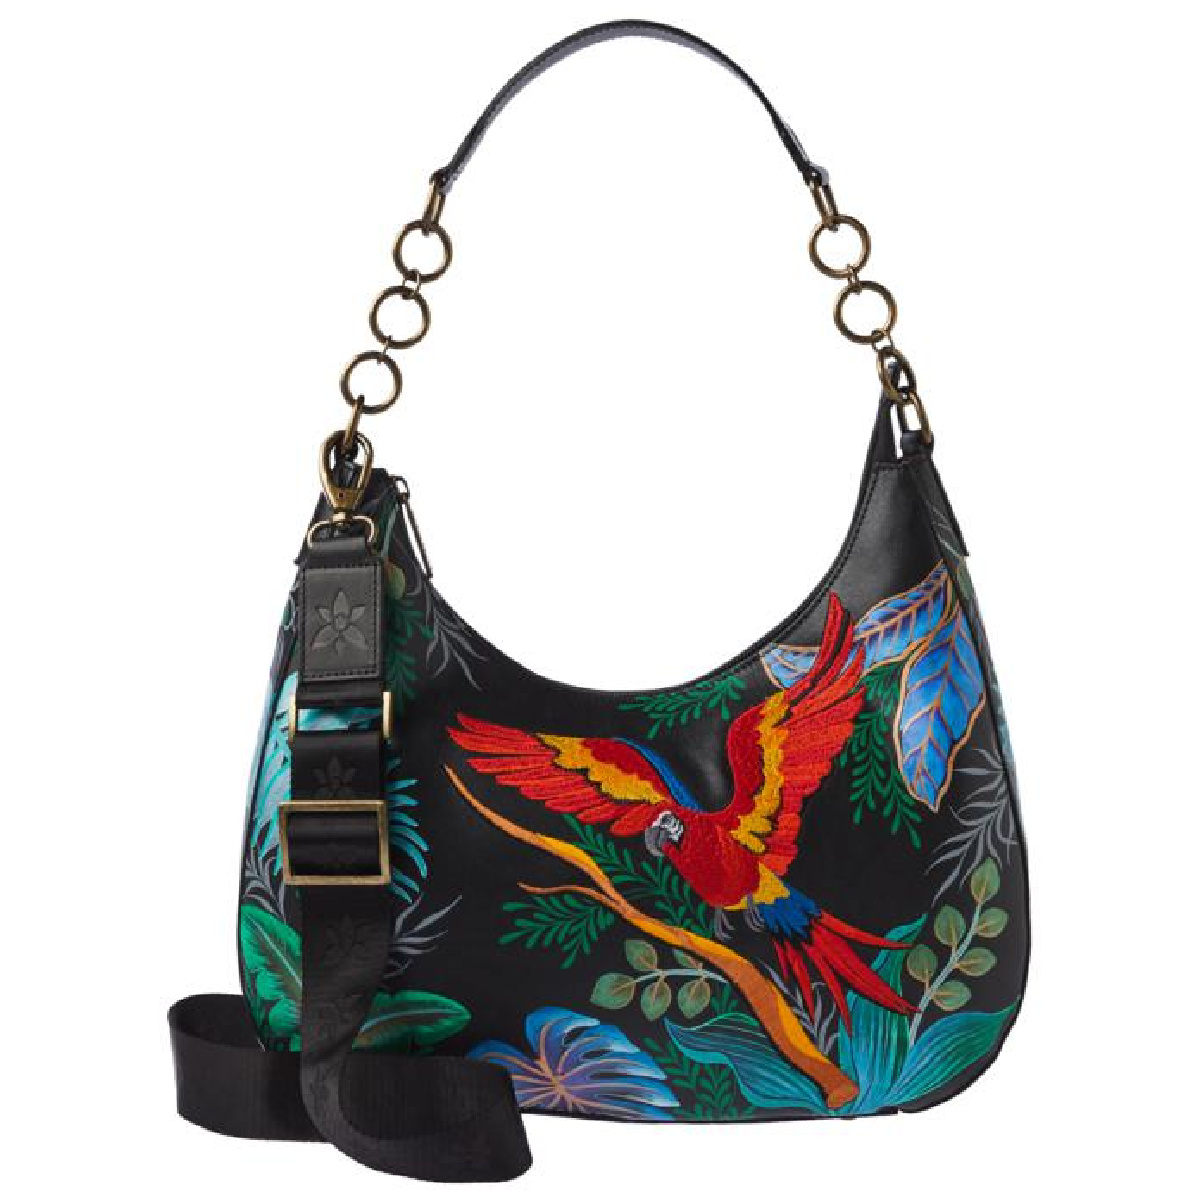 Anuschka Hand-Painted Embroidered Leather Hobo Bag